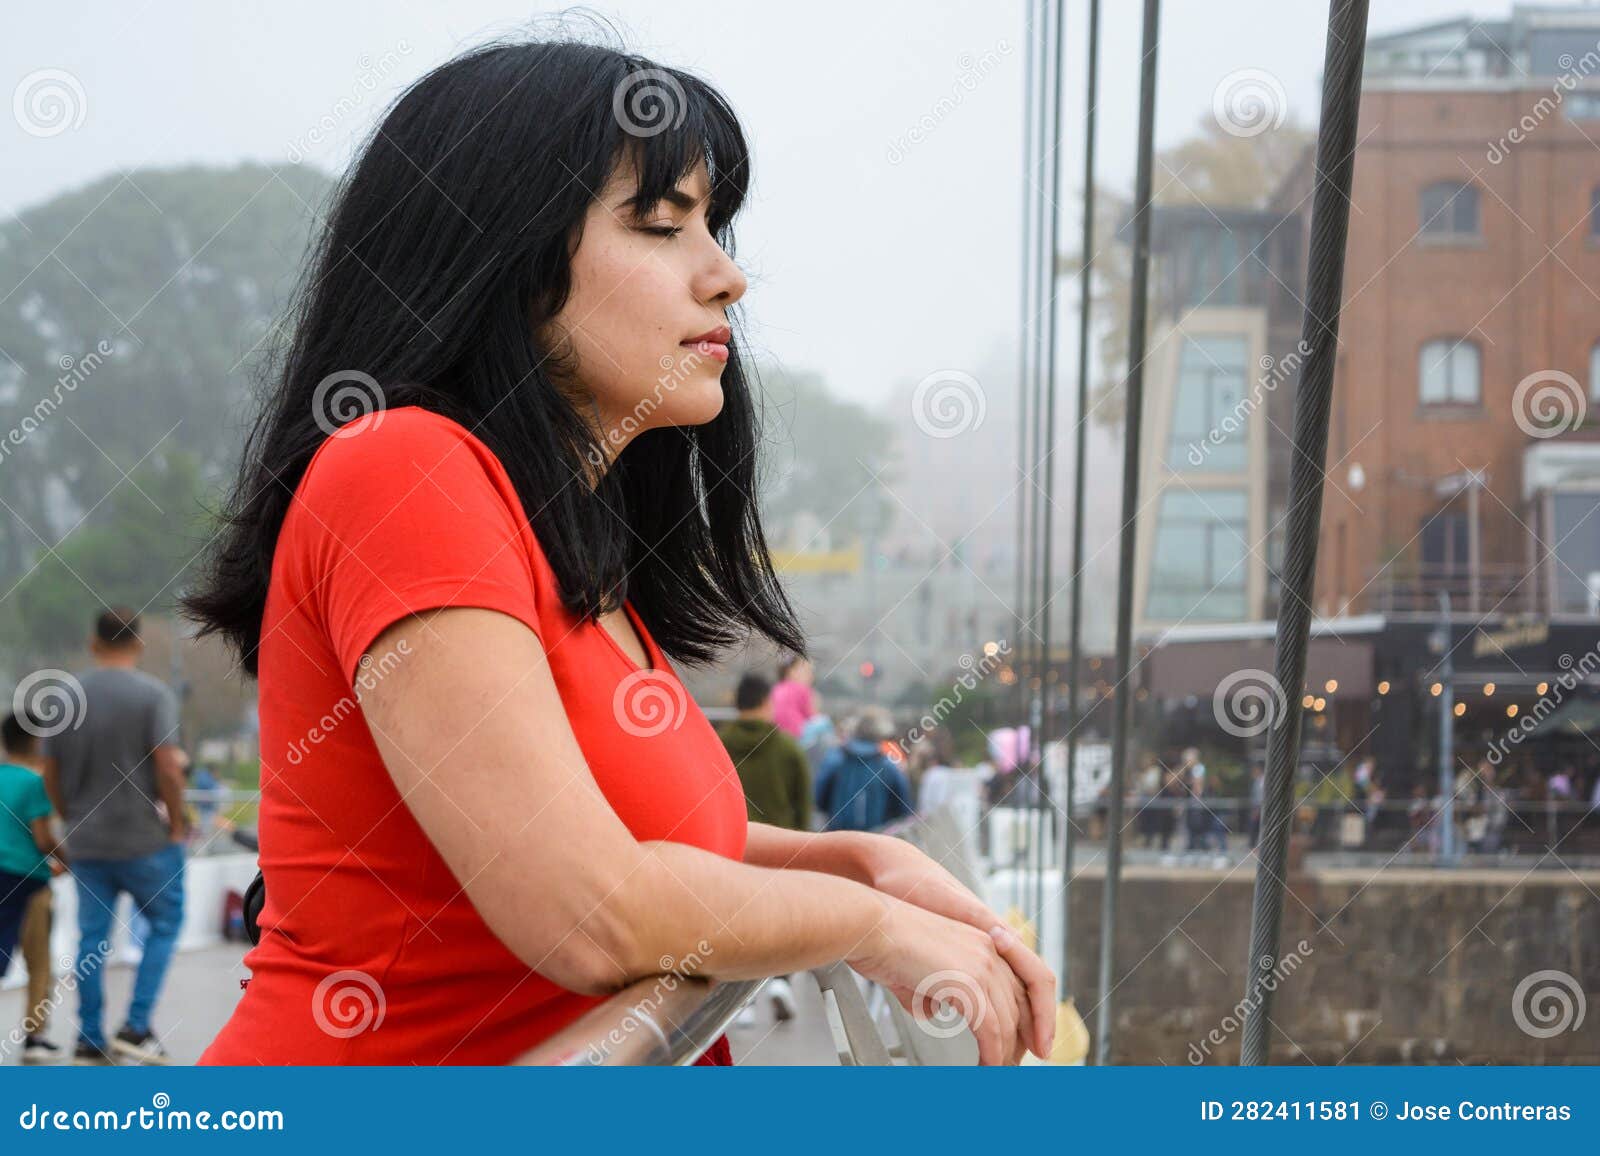 young latin woman leaning on the puente de la mujer in buenos aires calm with her eyes closed